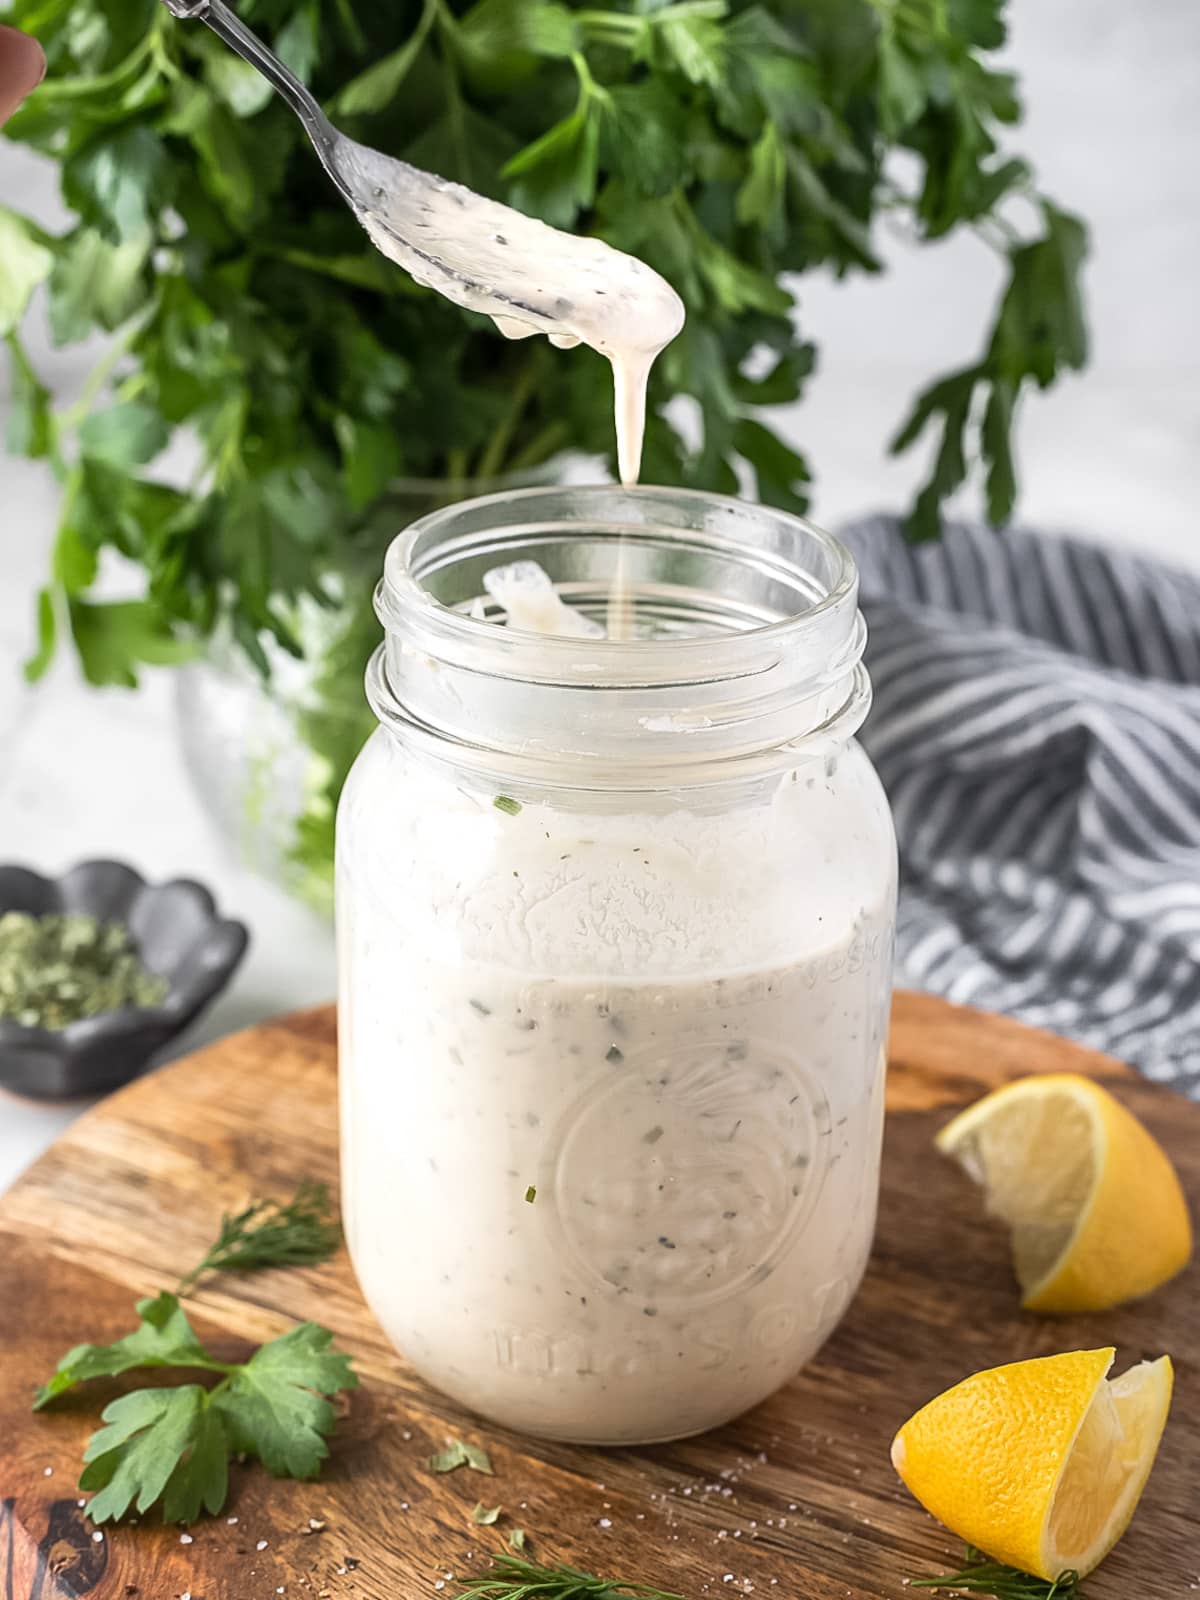 Spoonful of homemade ranch dressing being lifted out of a jar.